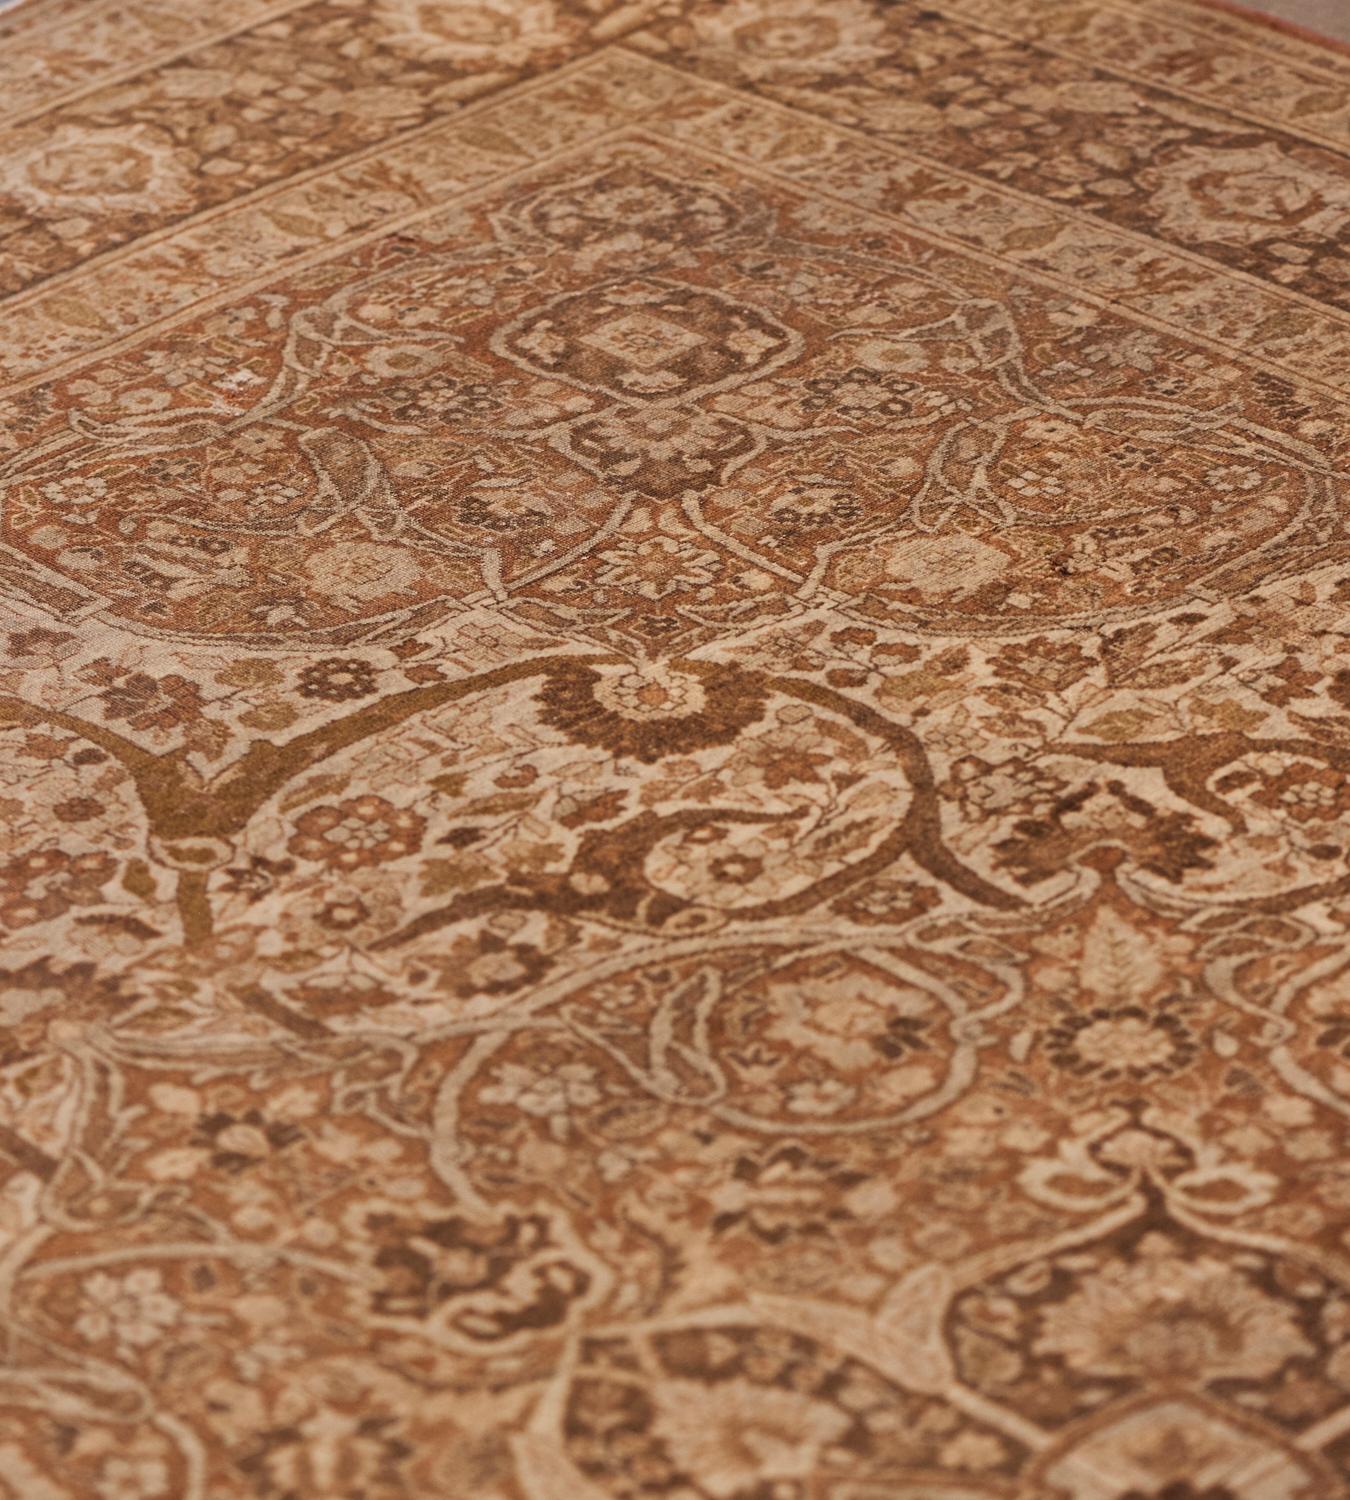 This antique, circa 1900, Tabriz rug has a pale-brown field with a dense floral and arabesque vine around a central light brown and ivory cusped medallion with pendants the medallion with a central ivory lozenge issuing soft-brown soft brown